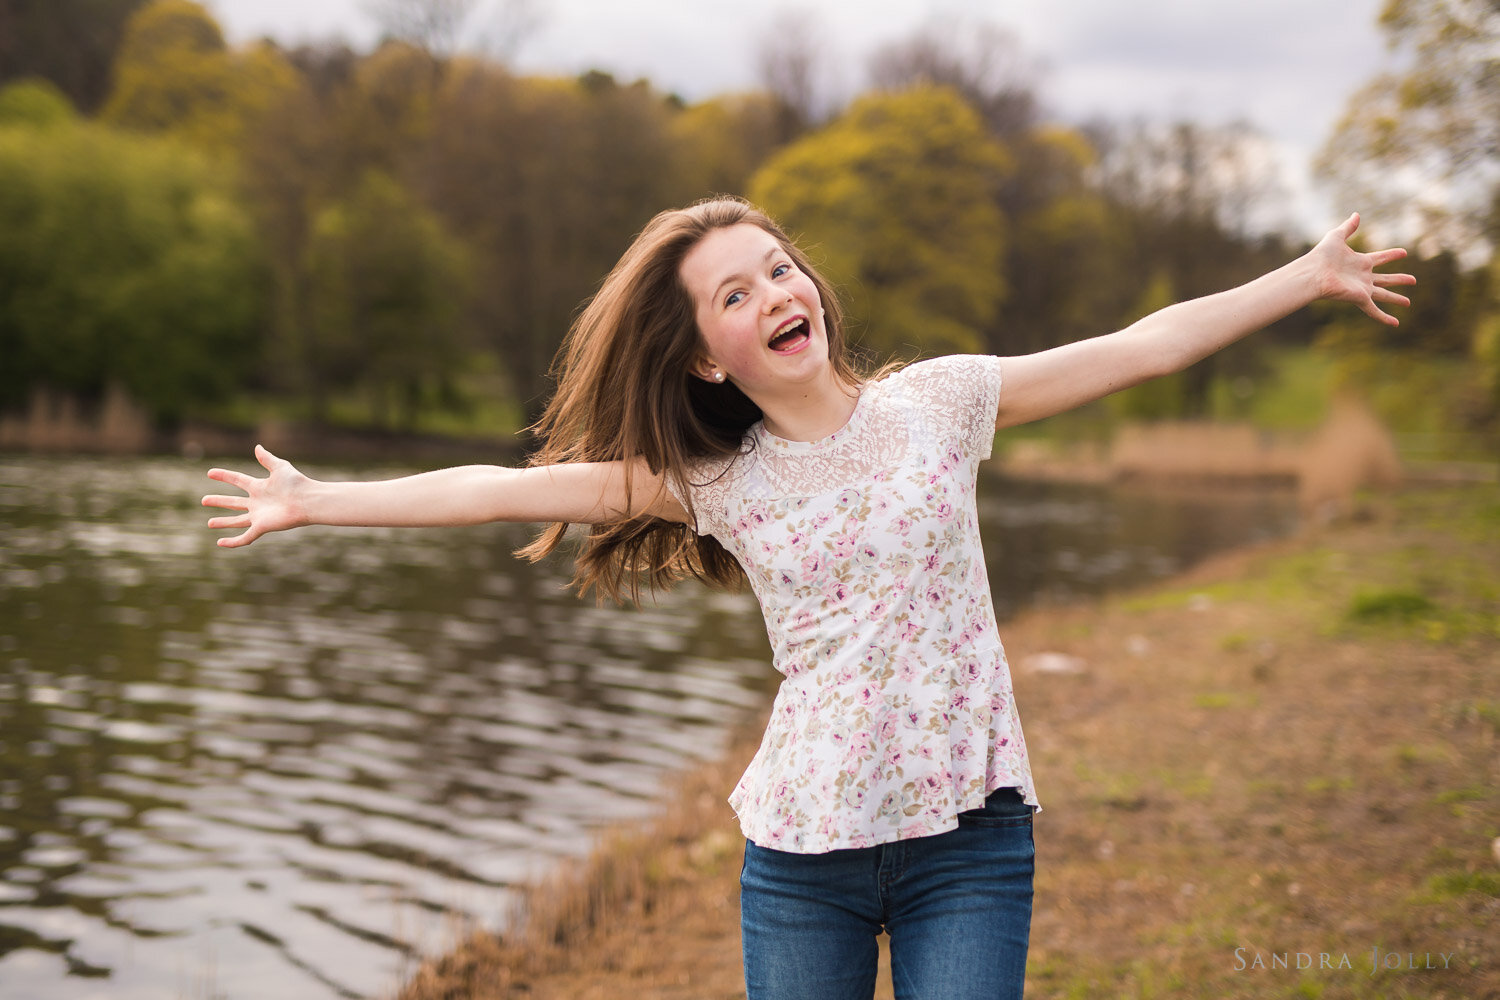 a-photo-of-a-happy-teen-girl-with-arm-out-by-sandra-jolly-photography.jpg